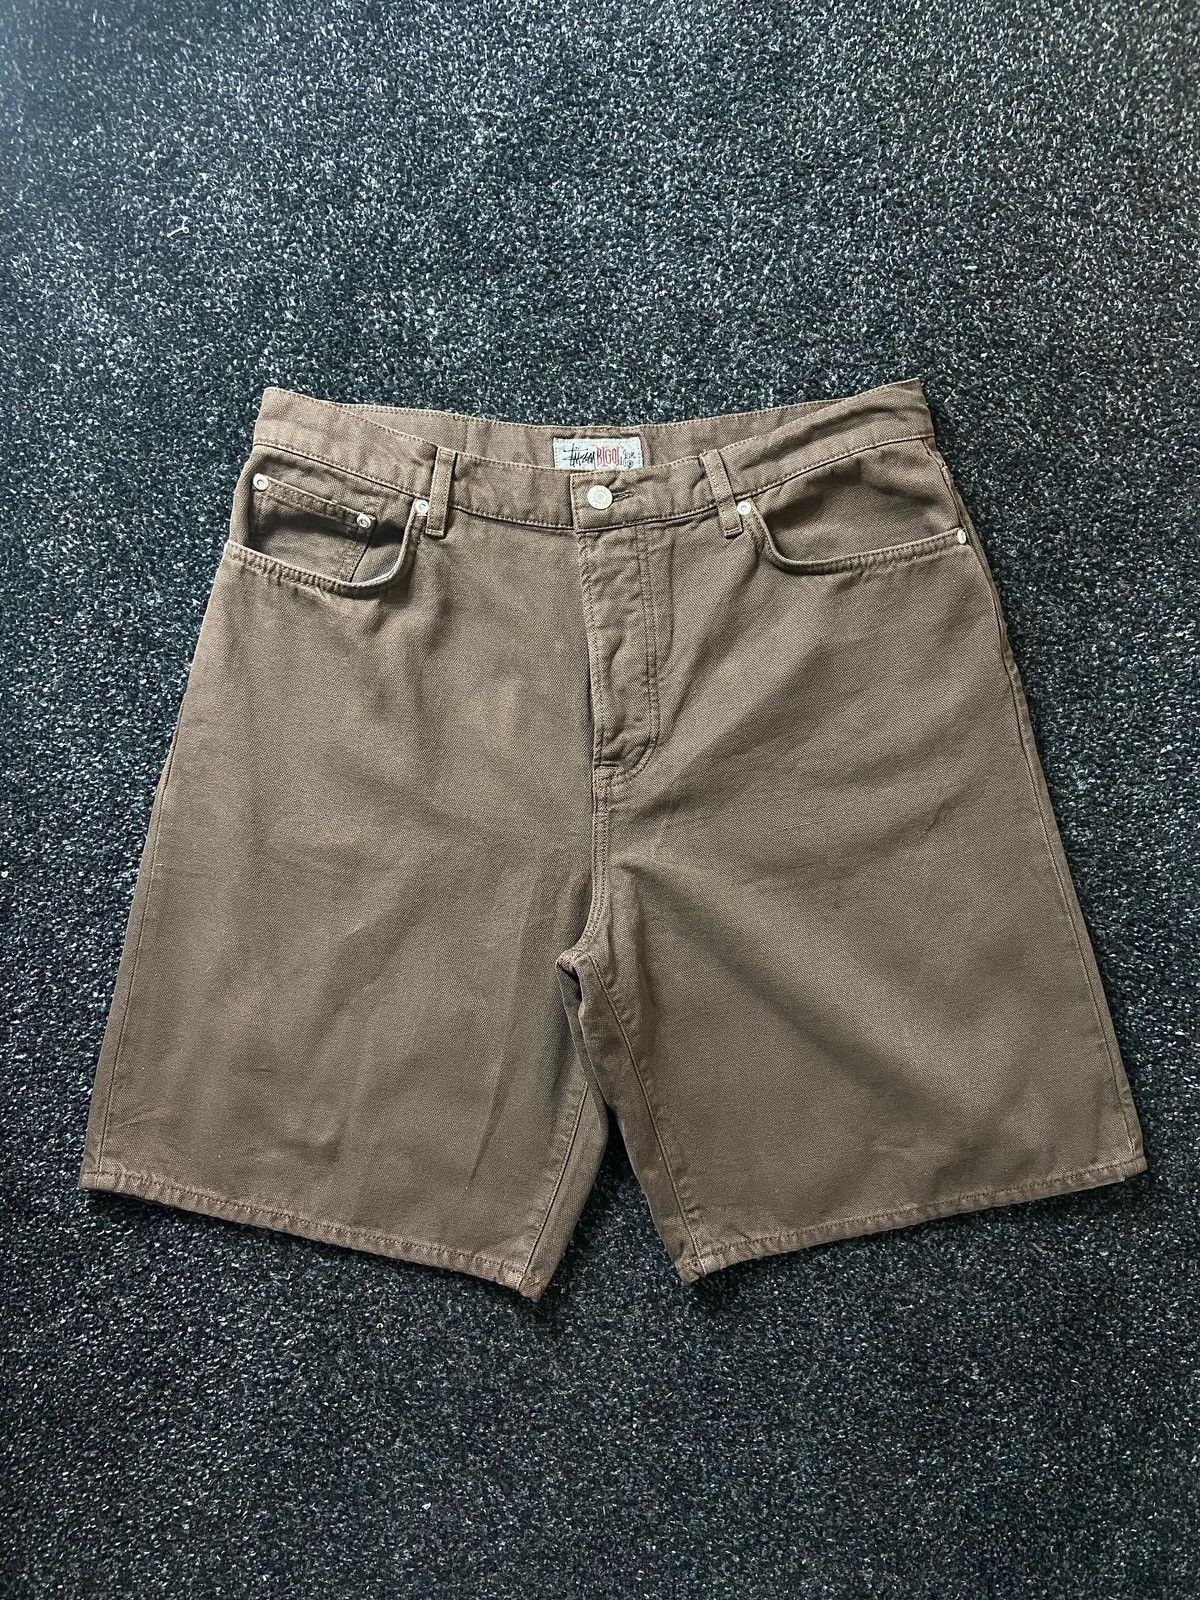 Pre-owned Stussy Big Ol Jeans Shorts Washed Brown Jorts In Blue